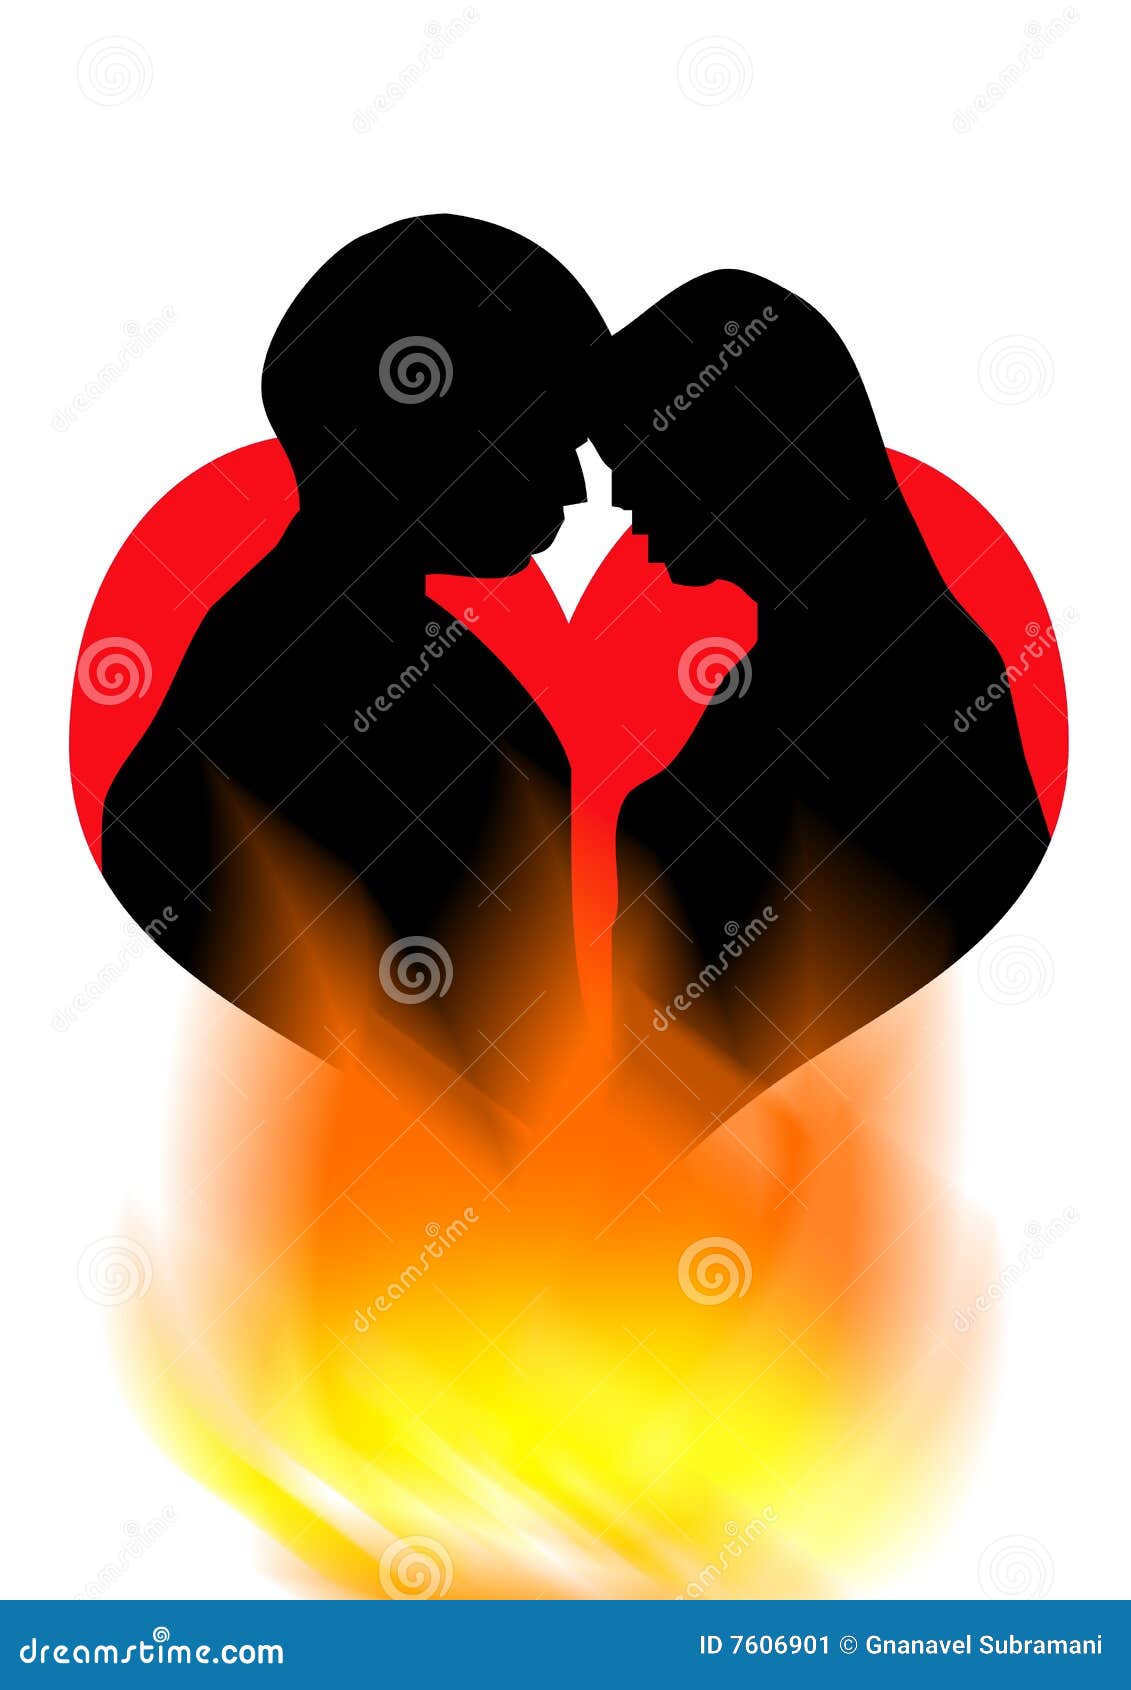 Download this Romance Kiss Romantic Love Symbol With Fire Background picture